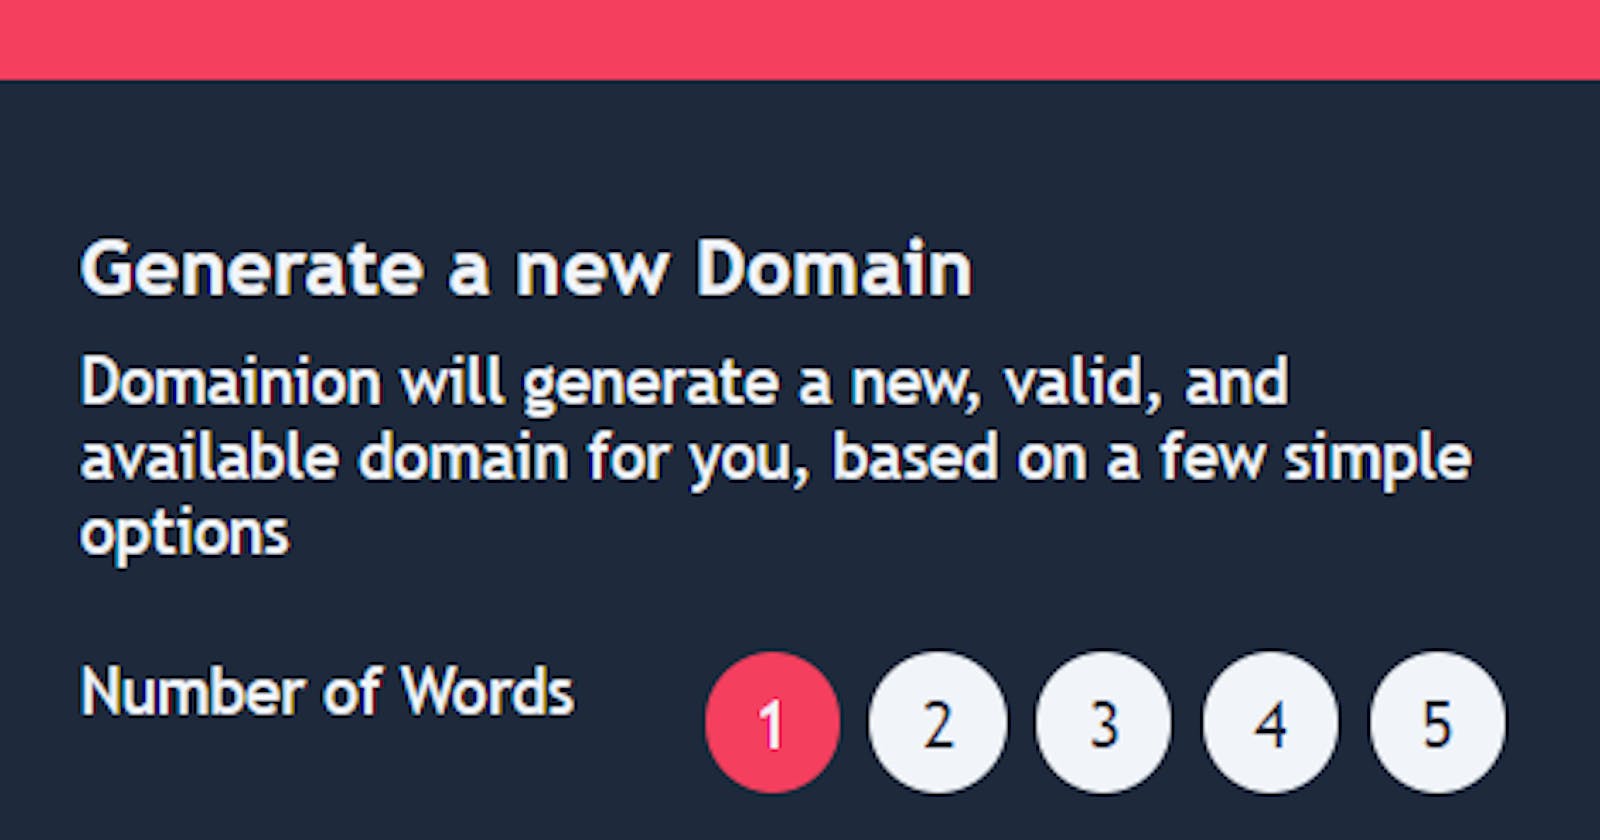 Welcome to my Domainion!